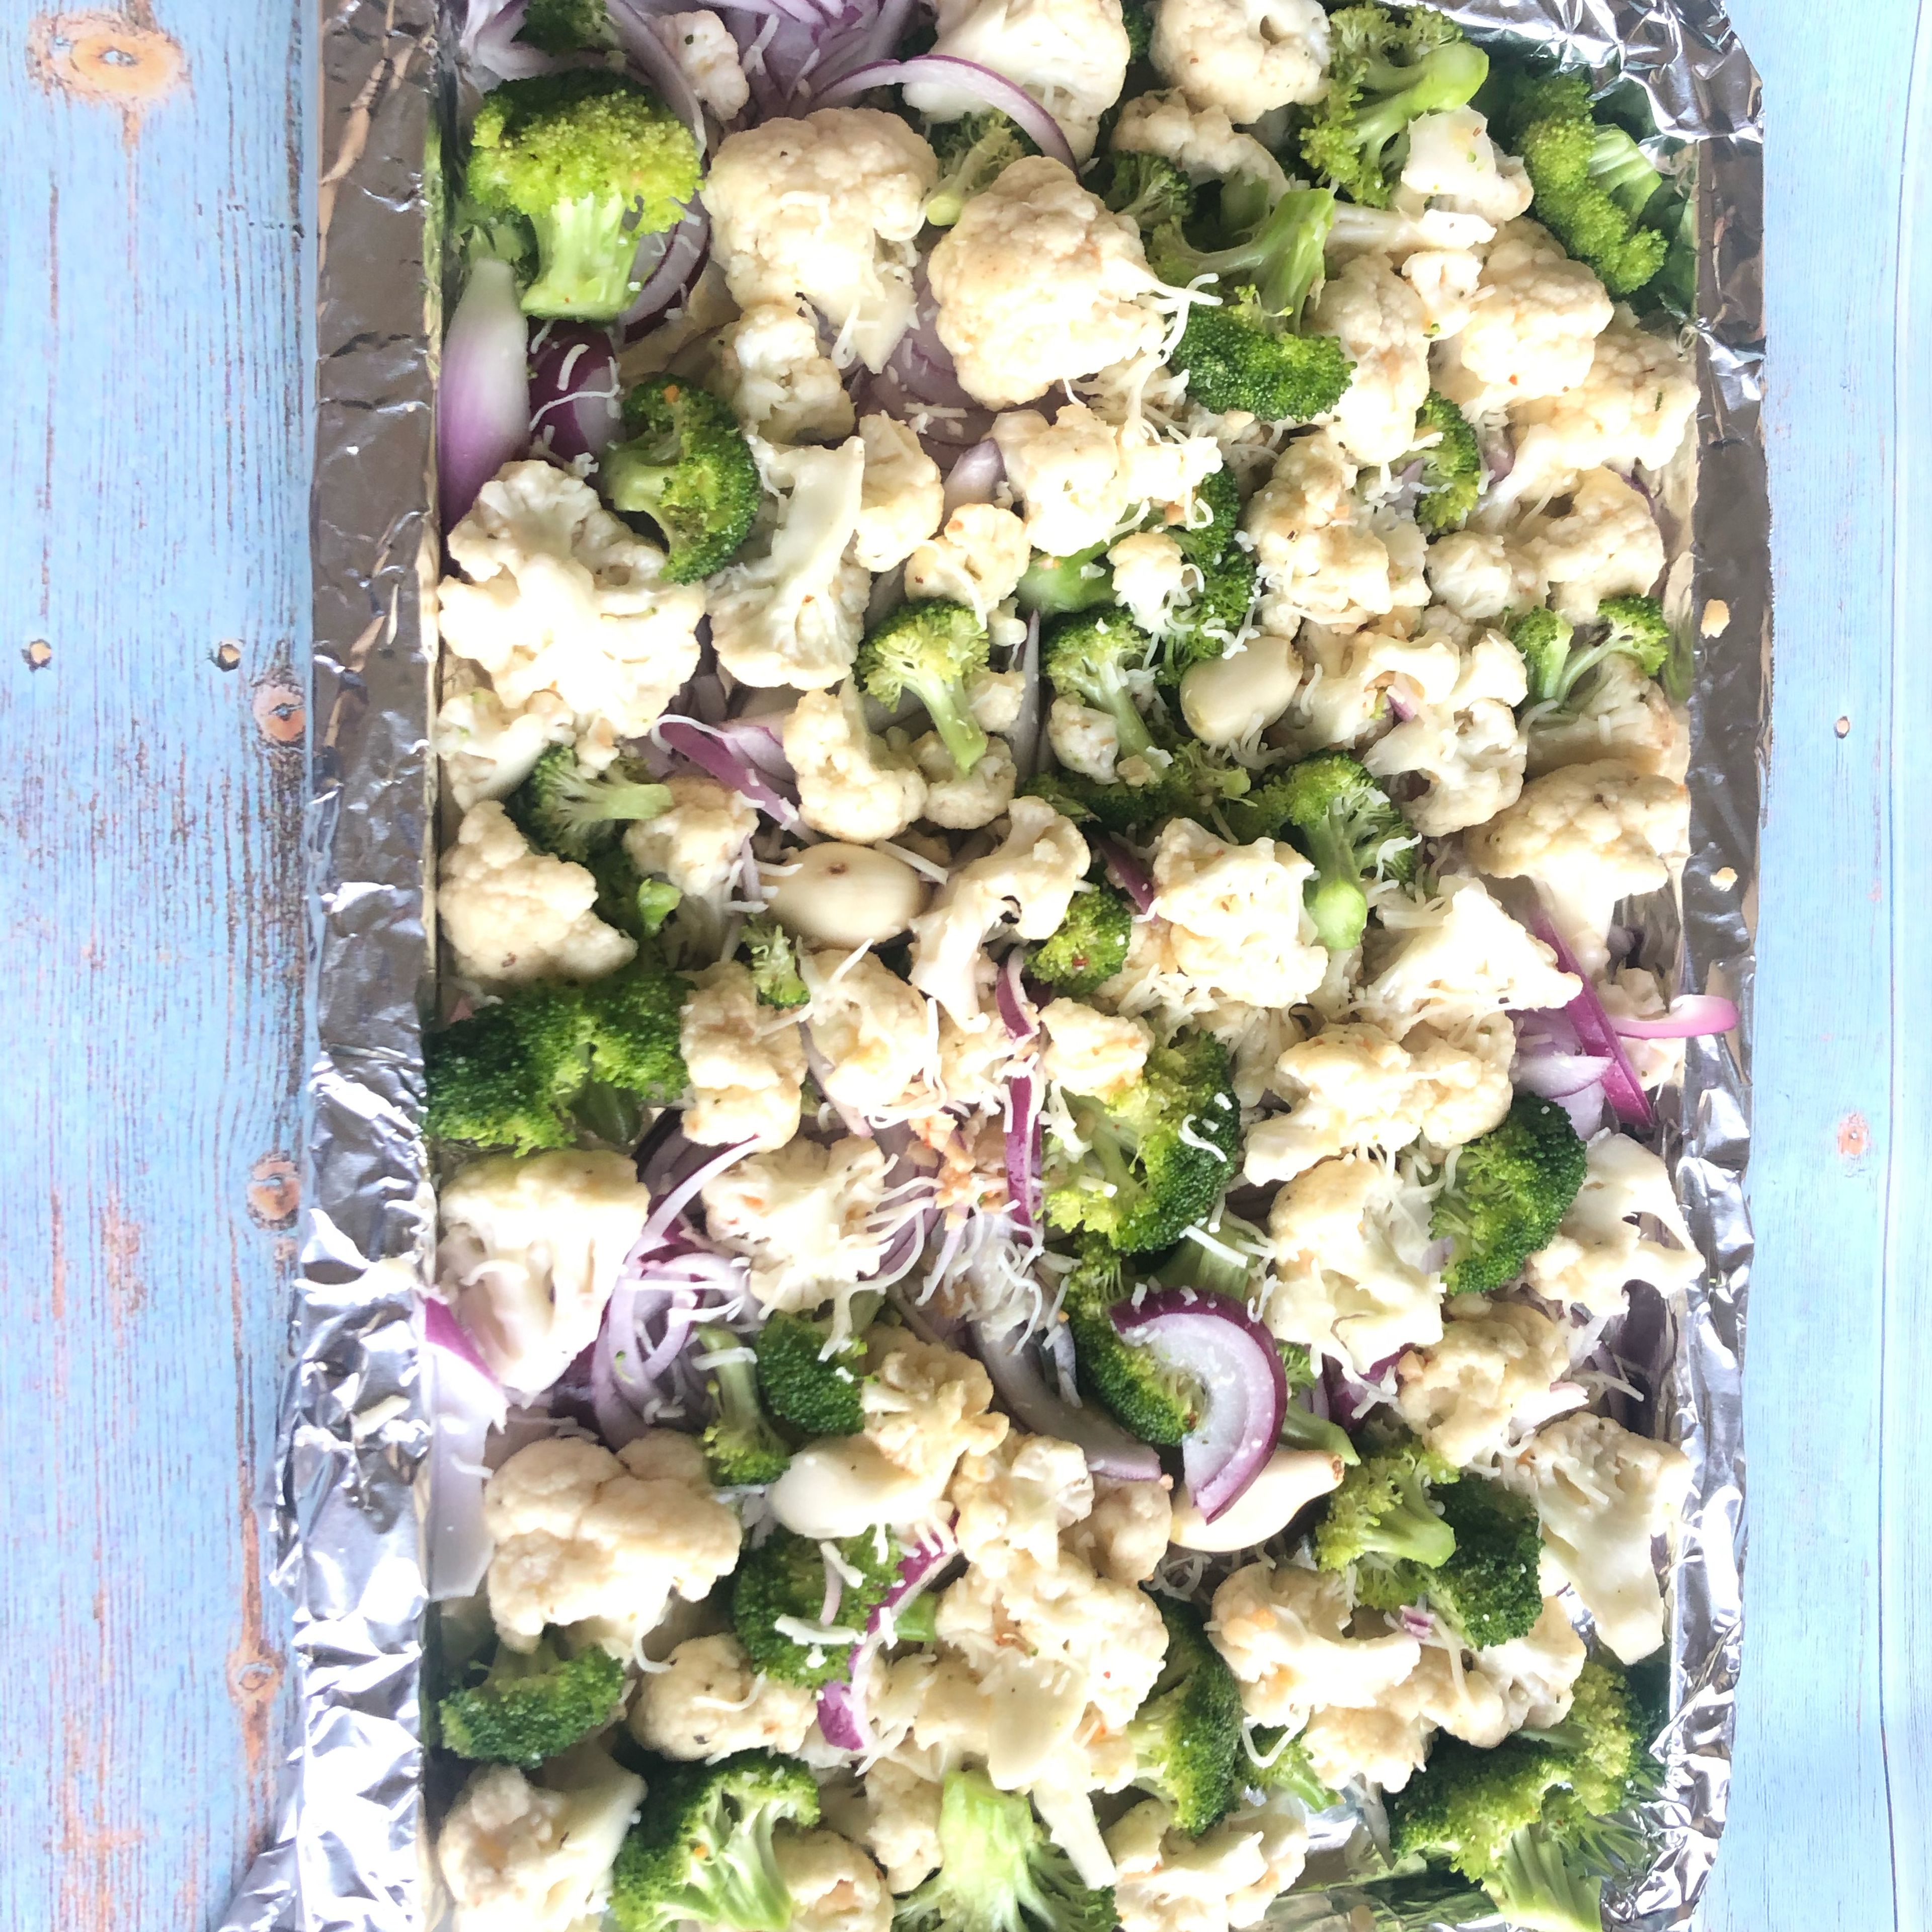 Spread veggies on to a baking sheet. Sprinkle Parmesan cheese over veggies.